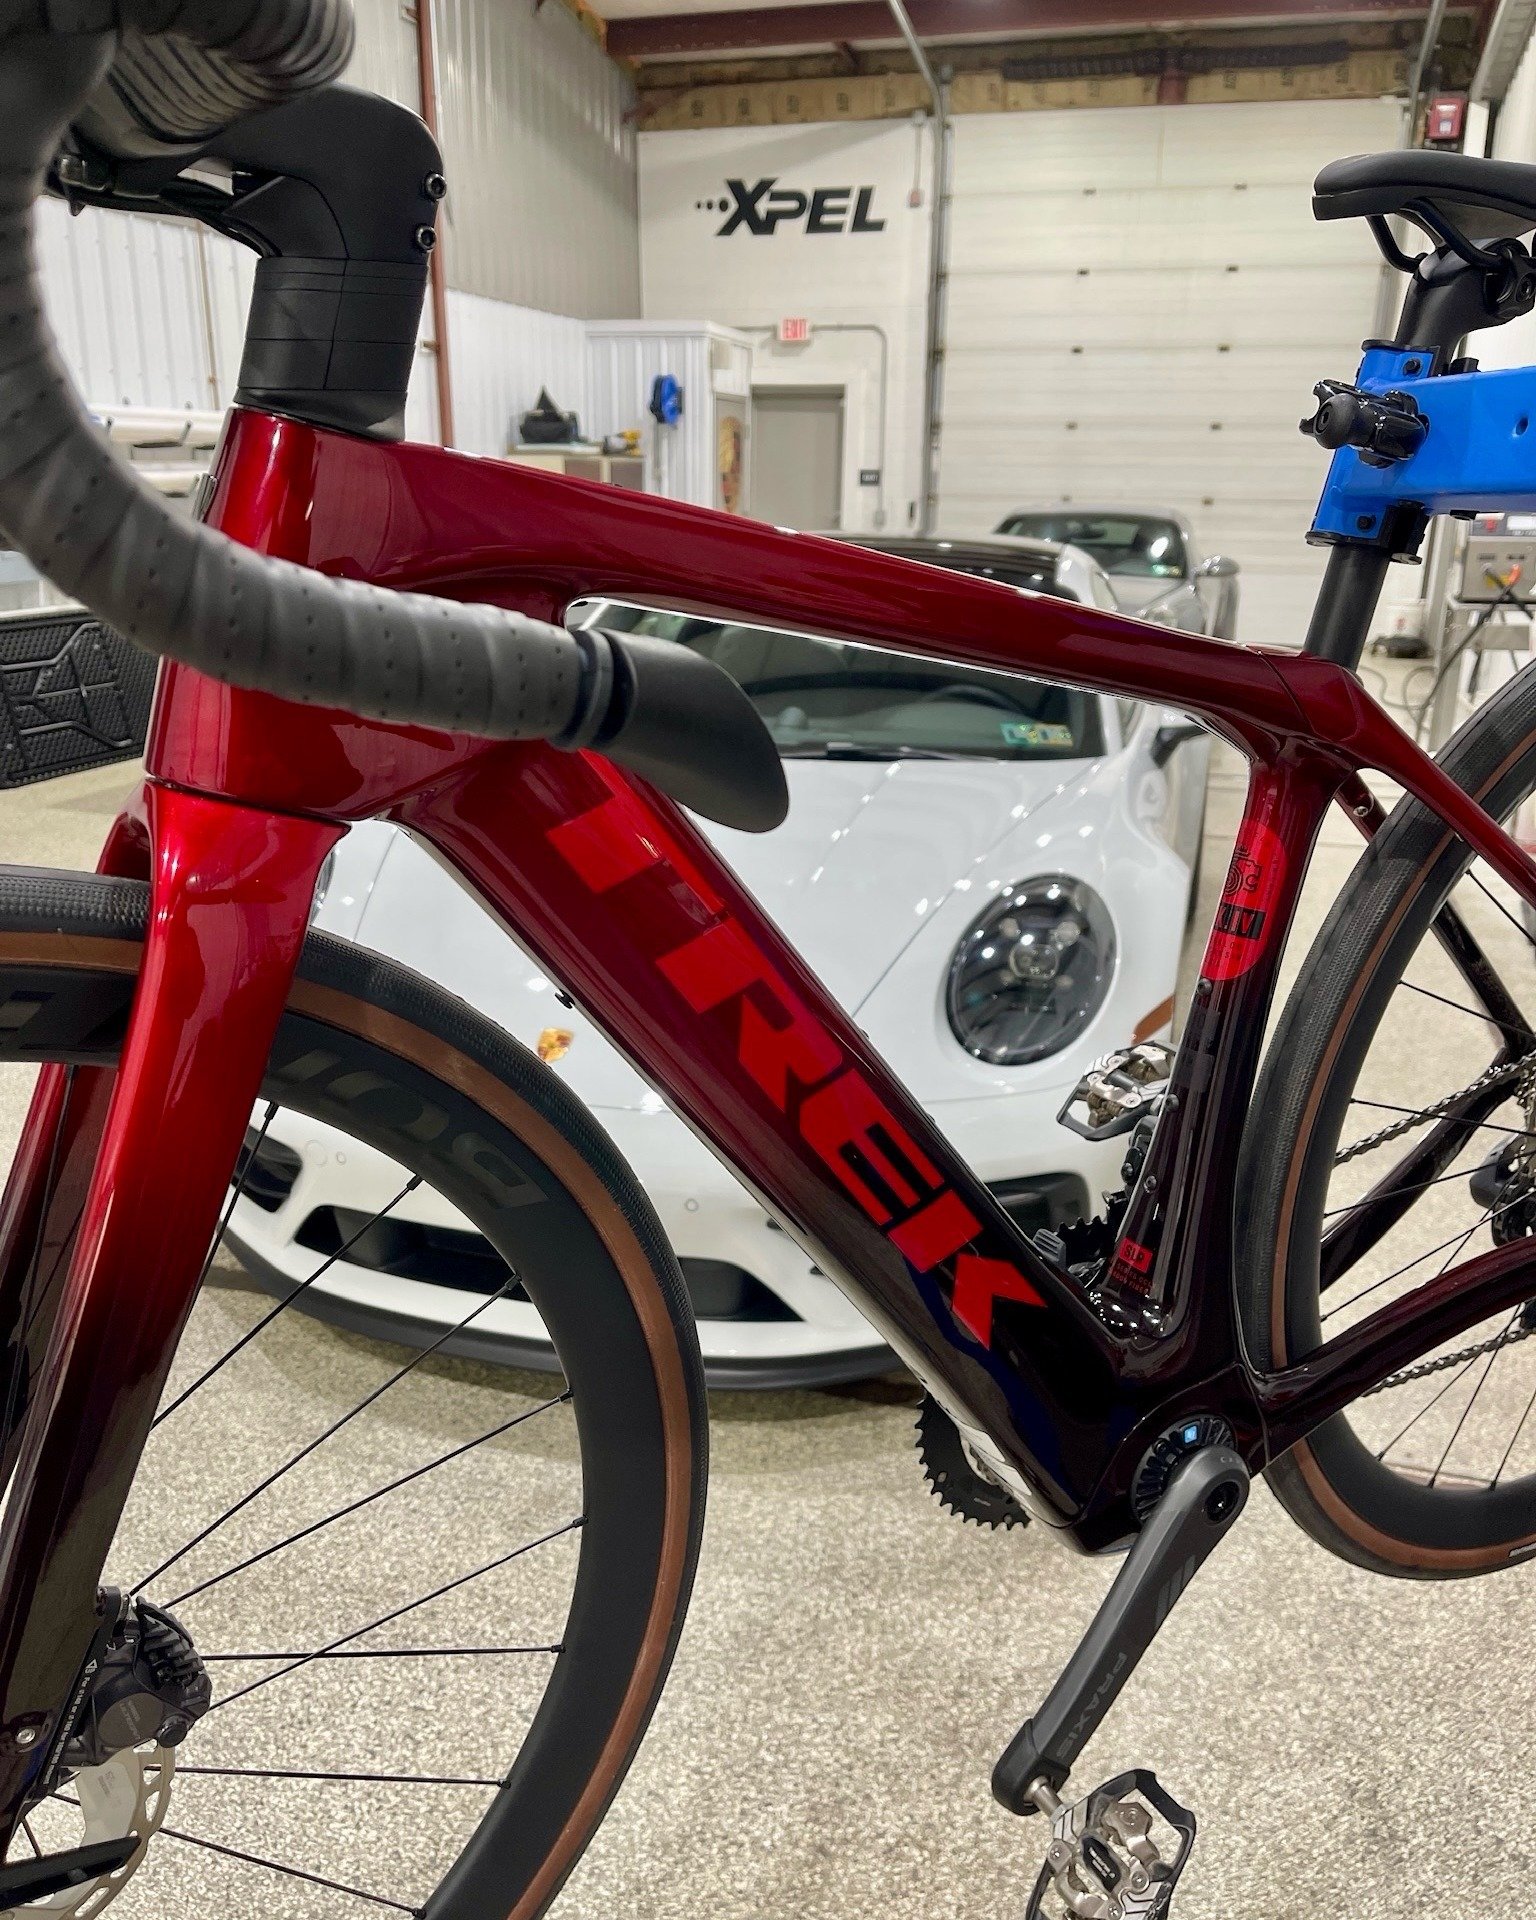 Protection doesn&rsquo;t have to stop at your car - we can protect your bicycle, too! @xpel InvisiFRAME kits will protect your bike and help minimize general wear, scuffs, abrasions, stone chips, storage and transportation mishaps. Ask us about the d